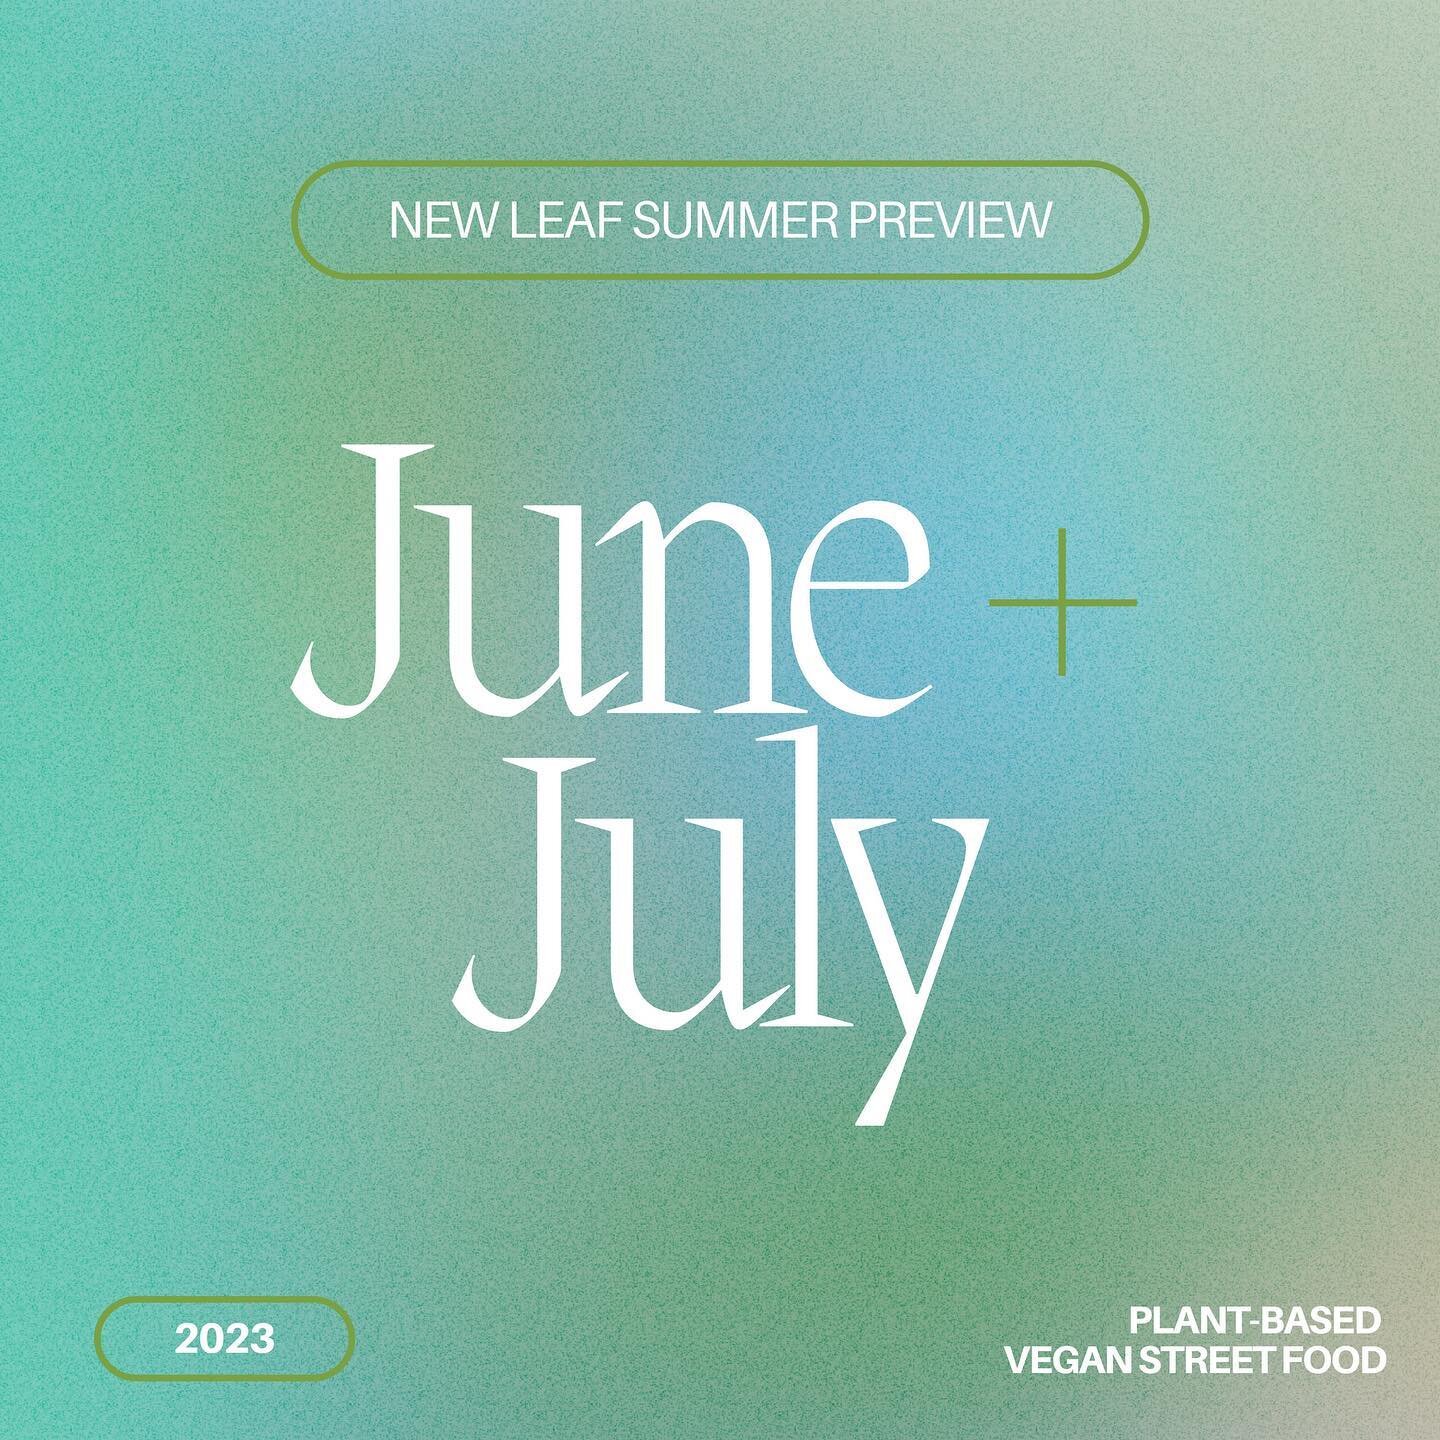 SUMMER PREVIEW! ☀️🍉 

We&rsquo;re got some scheduled maintence on the truck this week, and some summer planning in the works. We won&rsquo;t be out this week - but we&rsquo;re sharing a sneak peak of some exciting upcoming events that we have in Jun